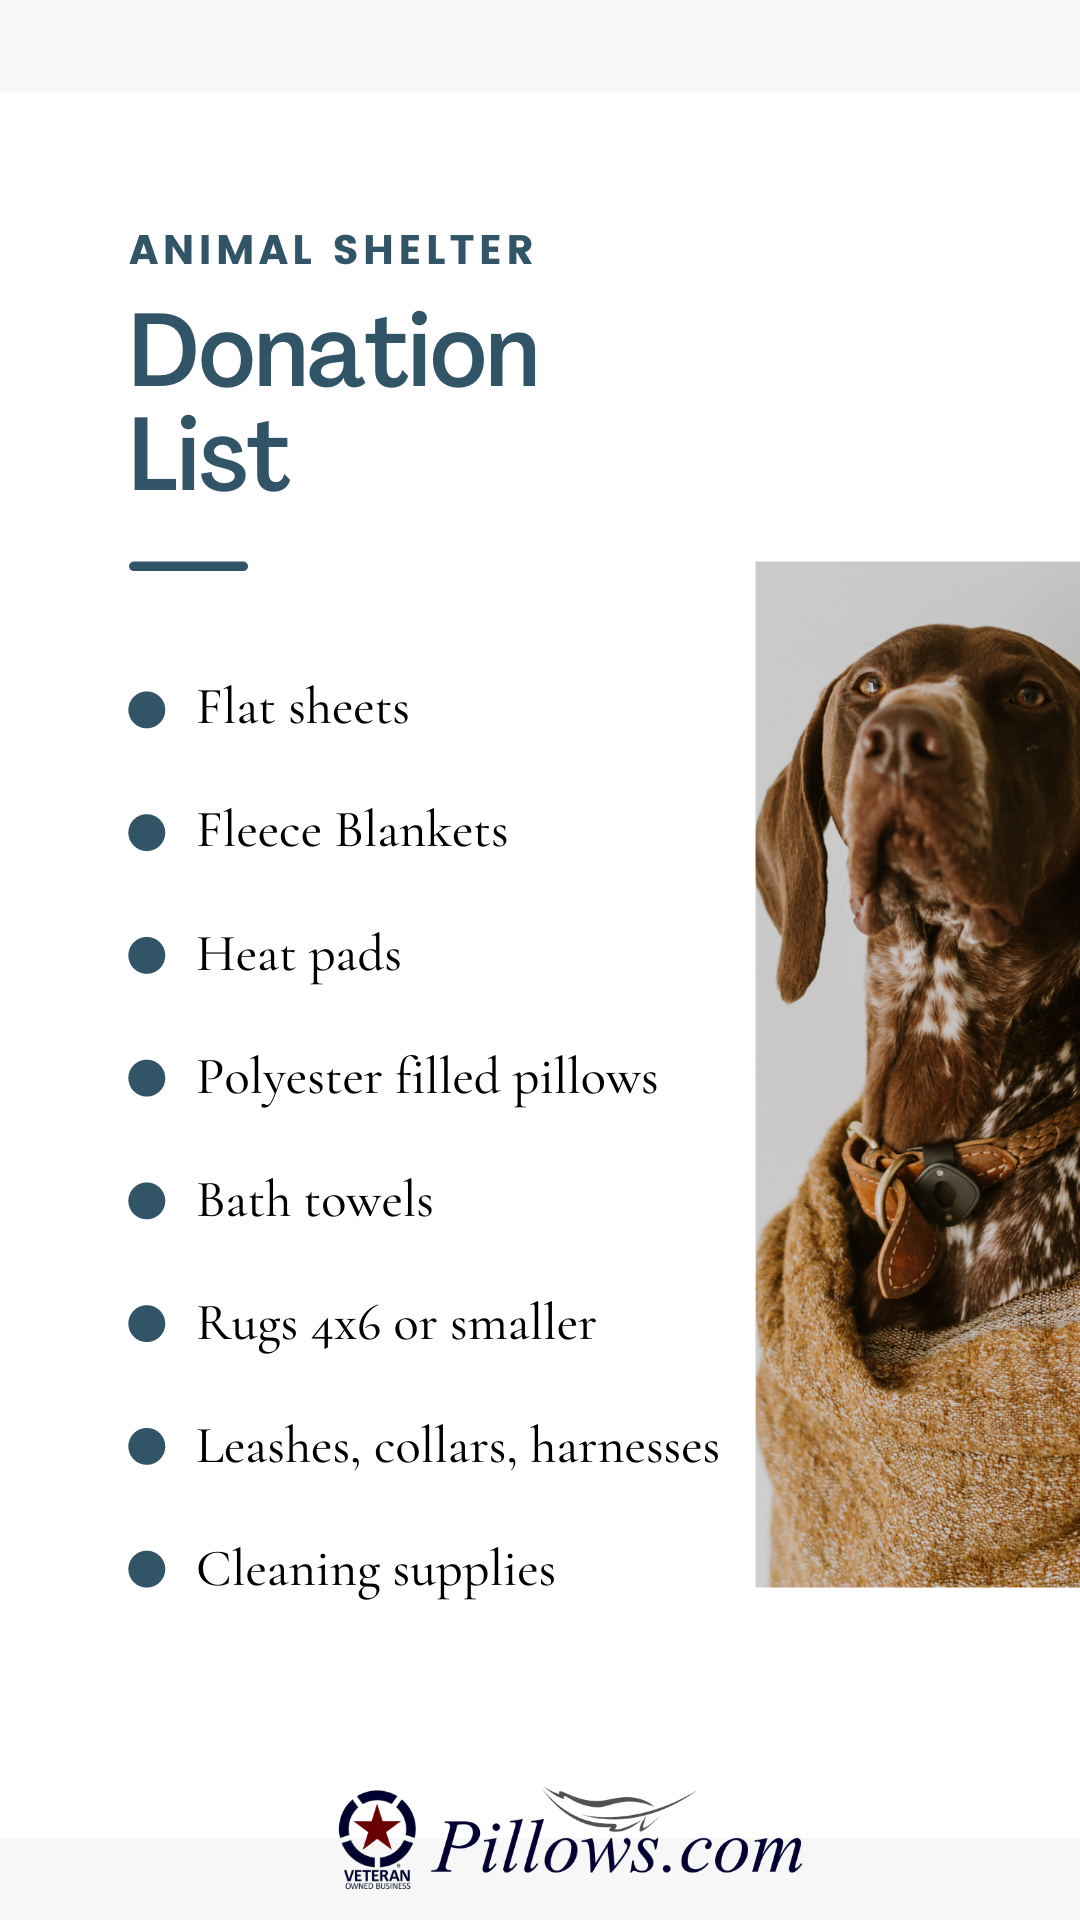 bedding donation items for pet shelters 